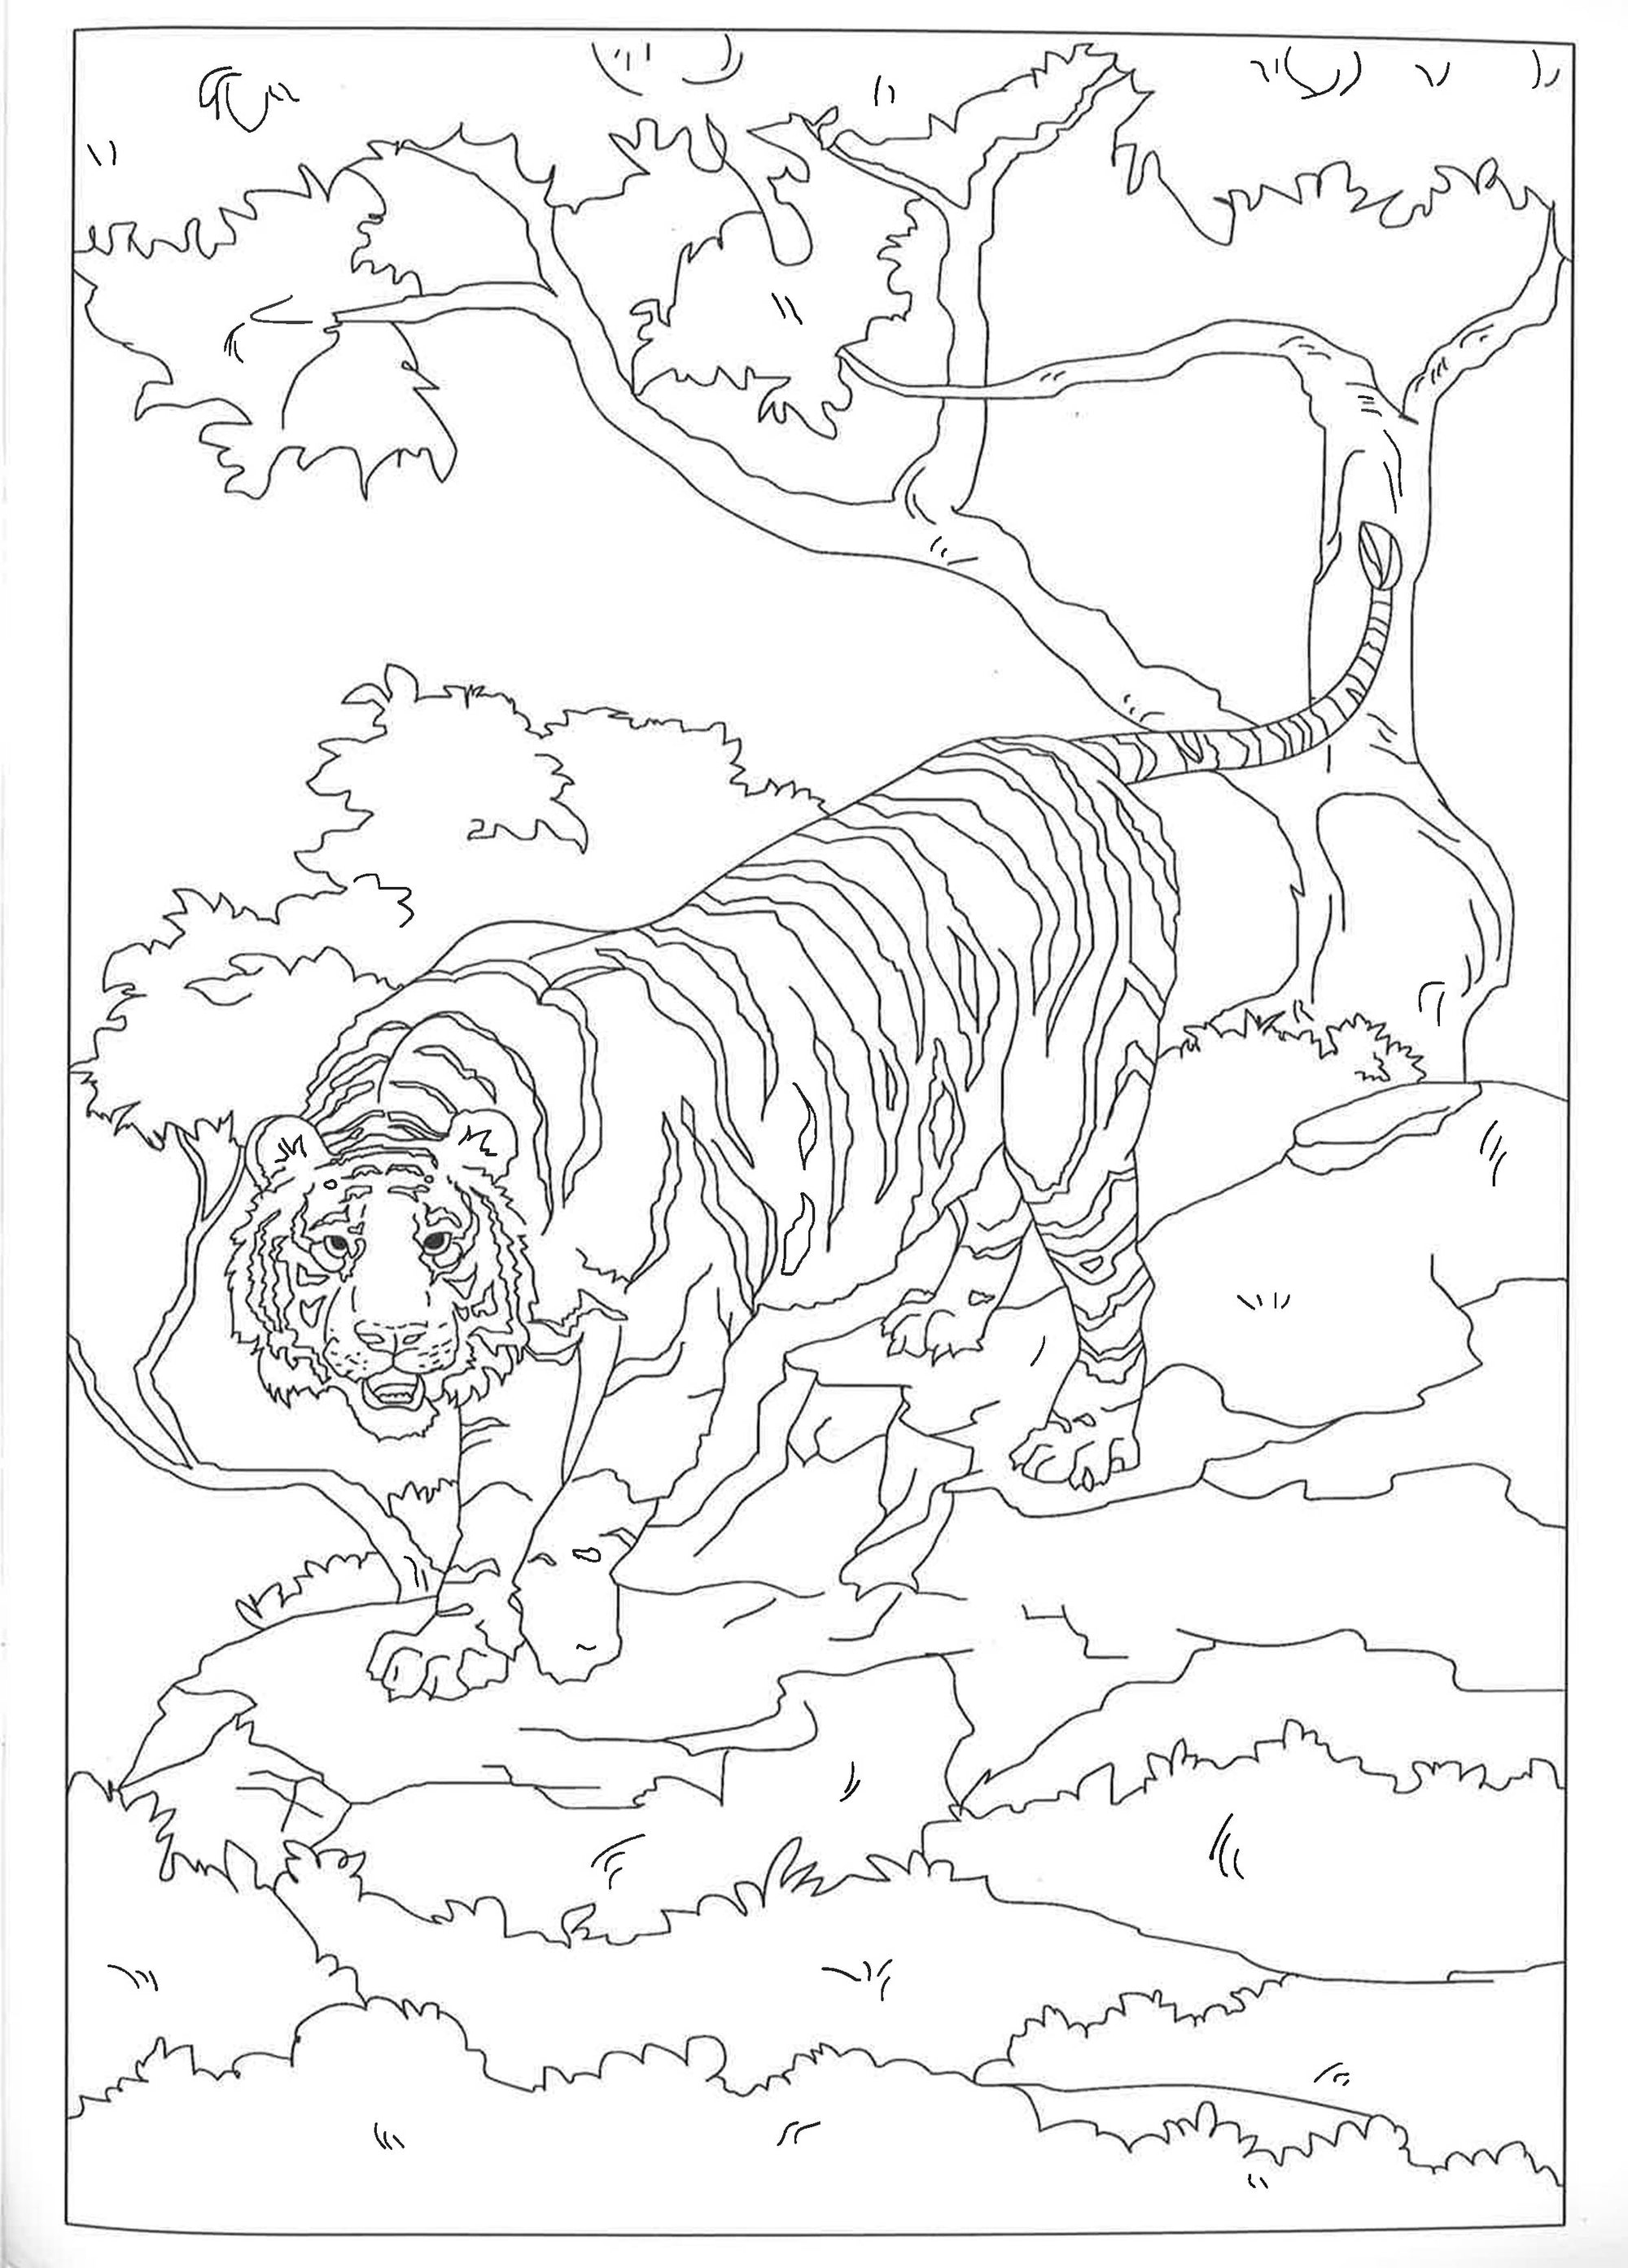 Creative Colouring For Adults: Wild Animals - BookXcess Online